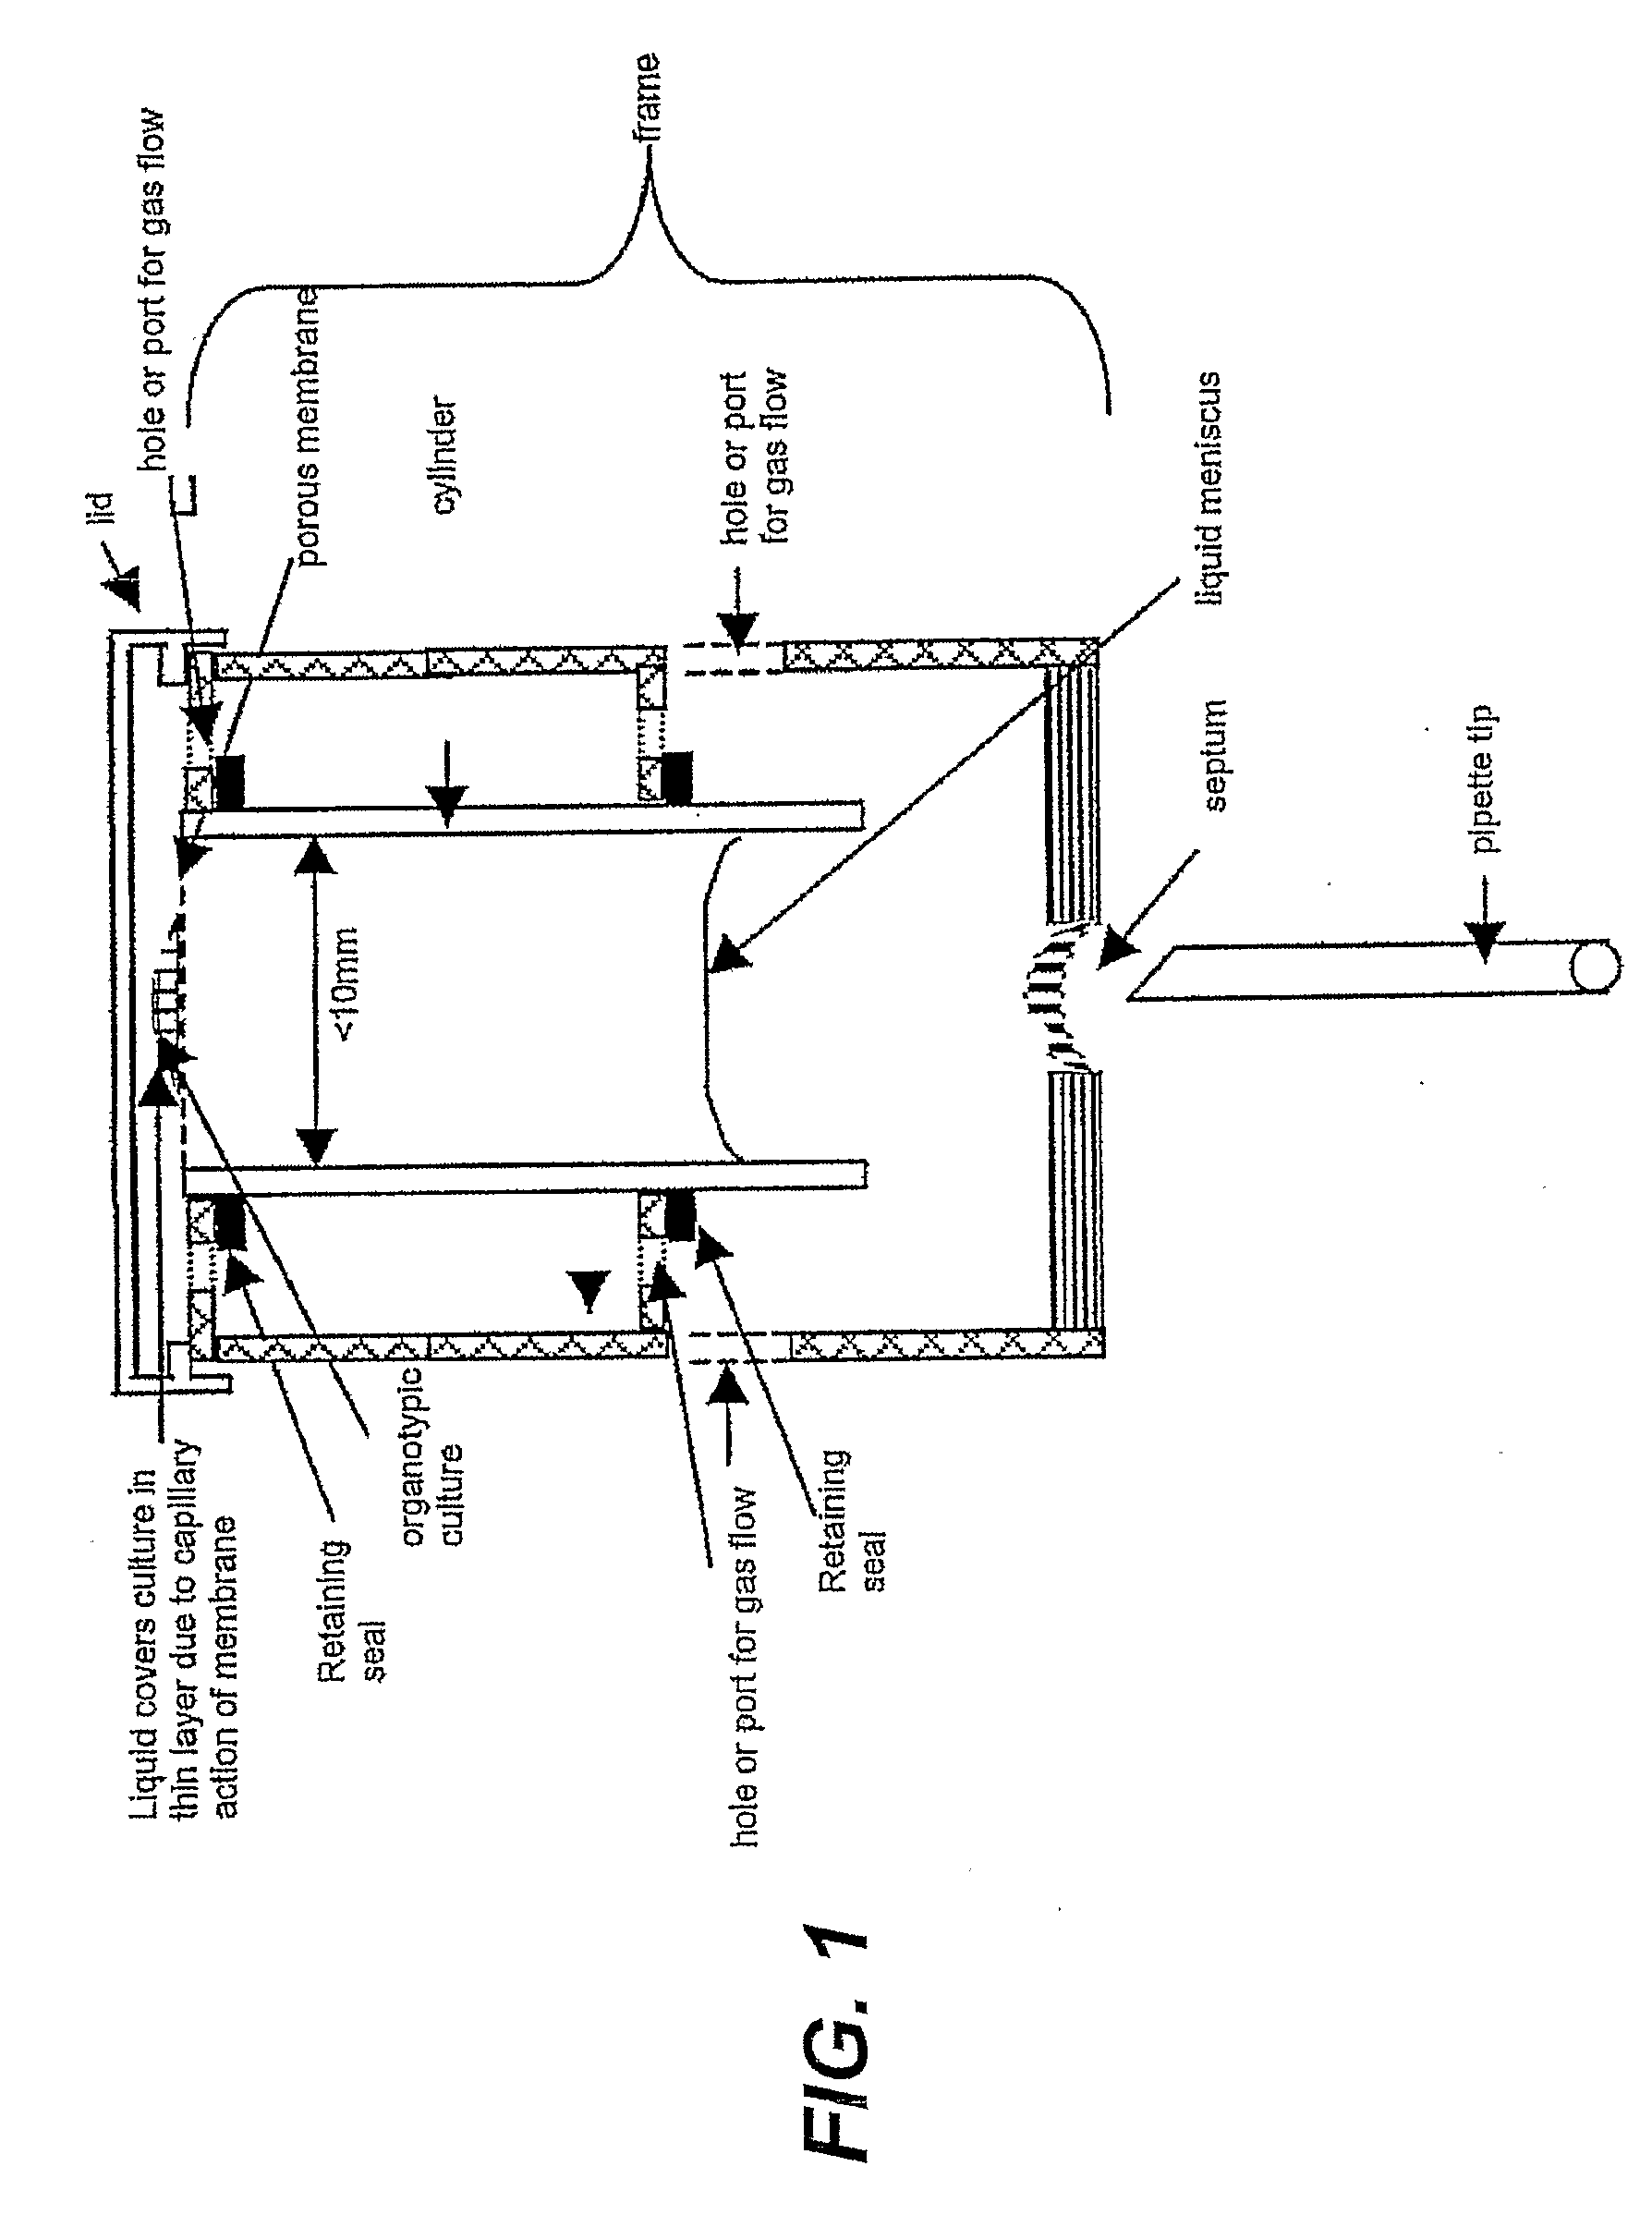 Cell- and Tissue Culture Device